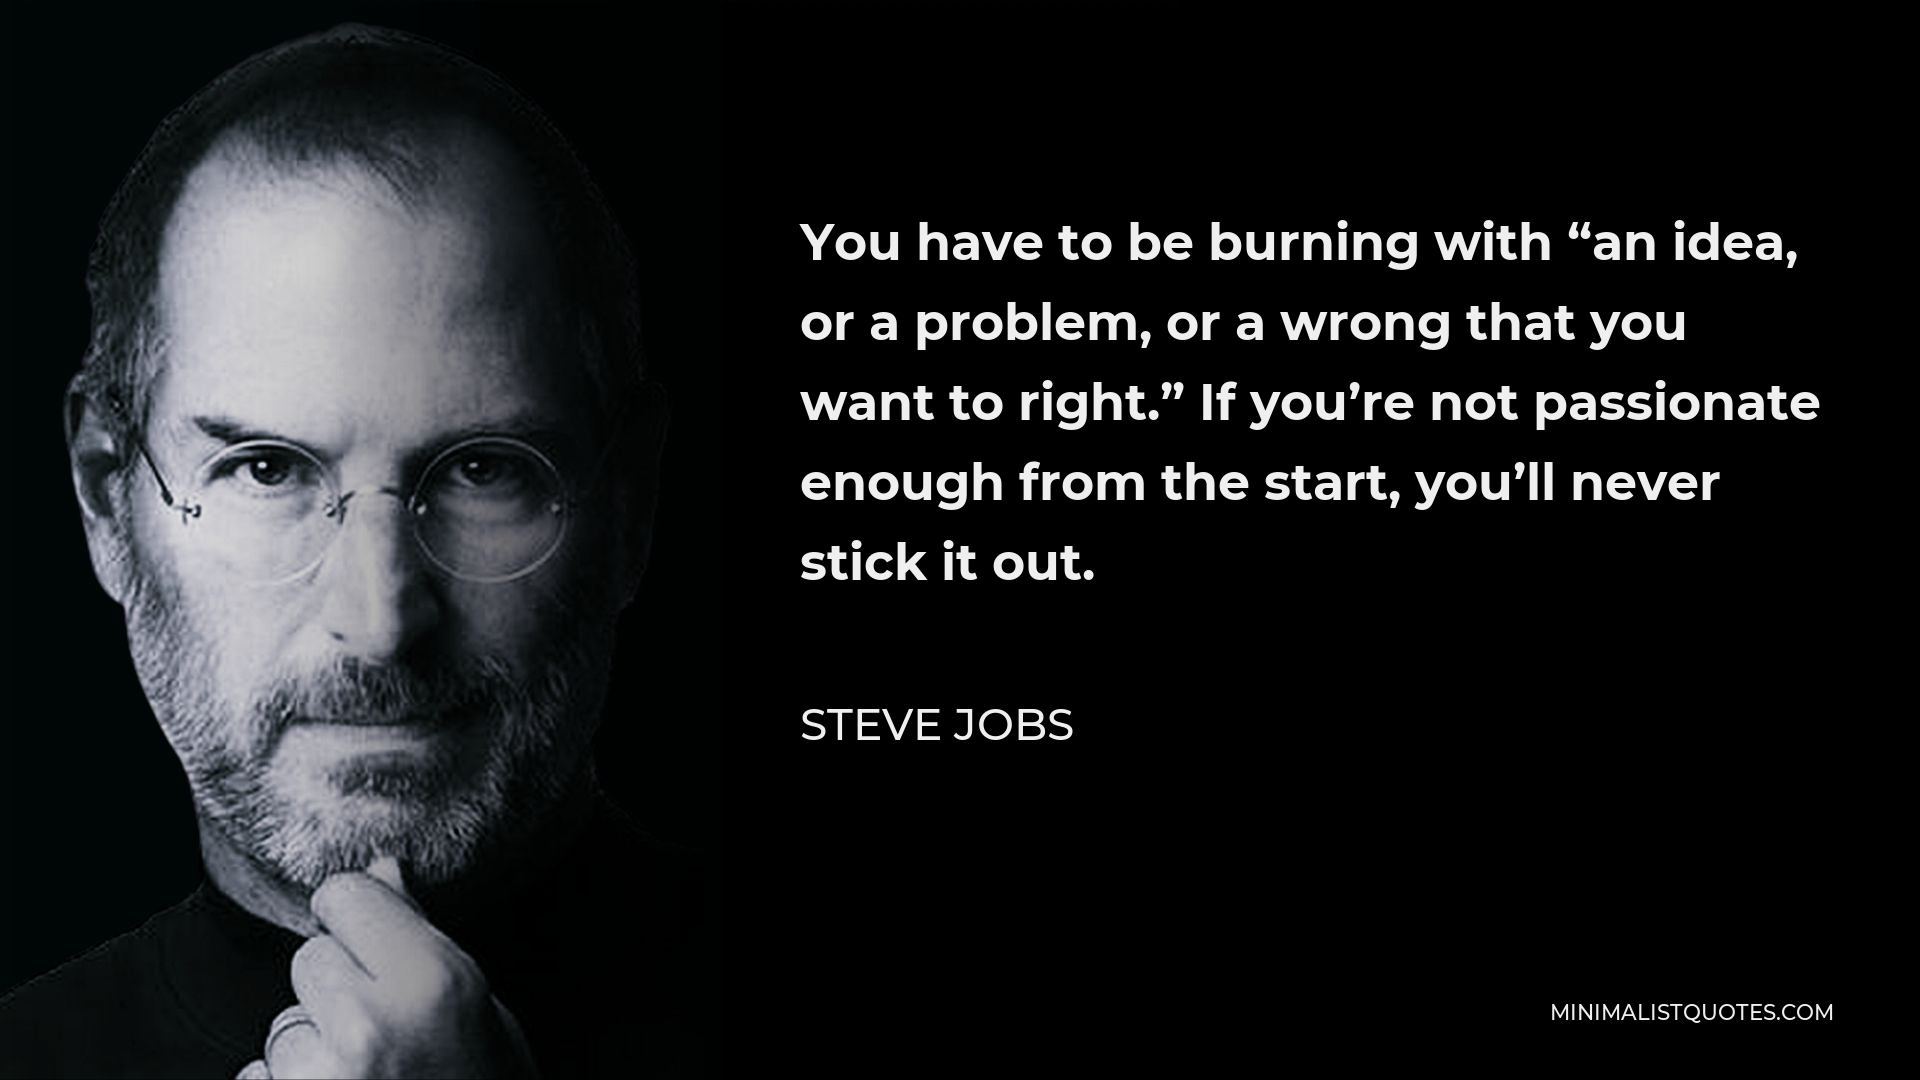 Steve Jobs Quote - You have to be burning with “an idea, or a problem, or a wrong that you want to right.” If you’re not passionate enough from the start, you’ll never stick it out.